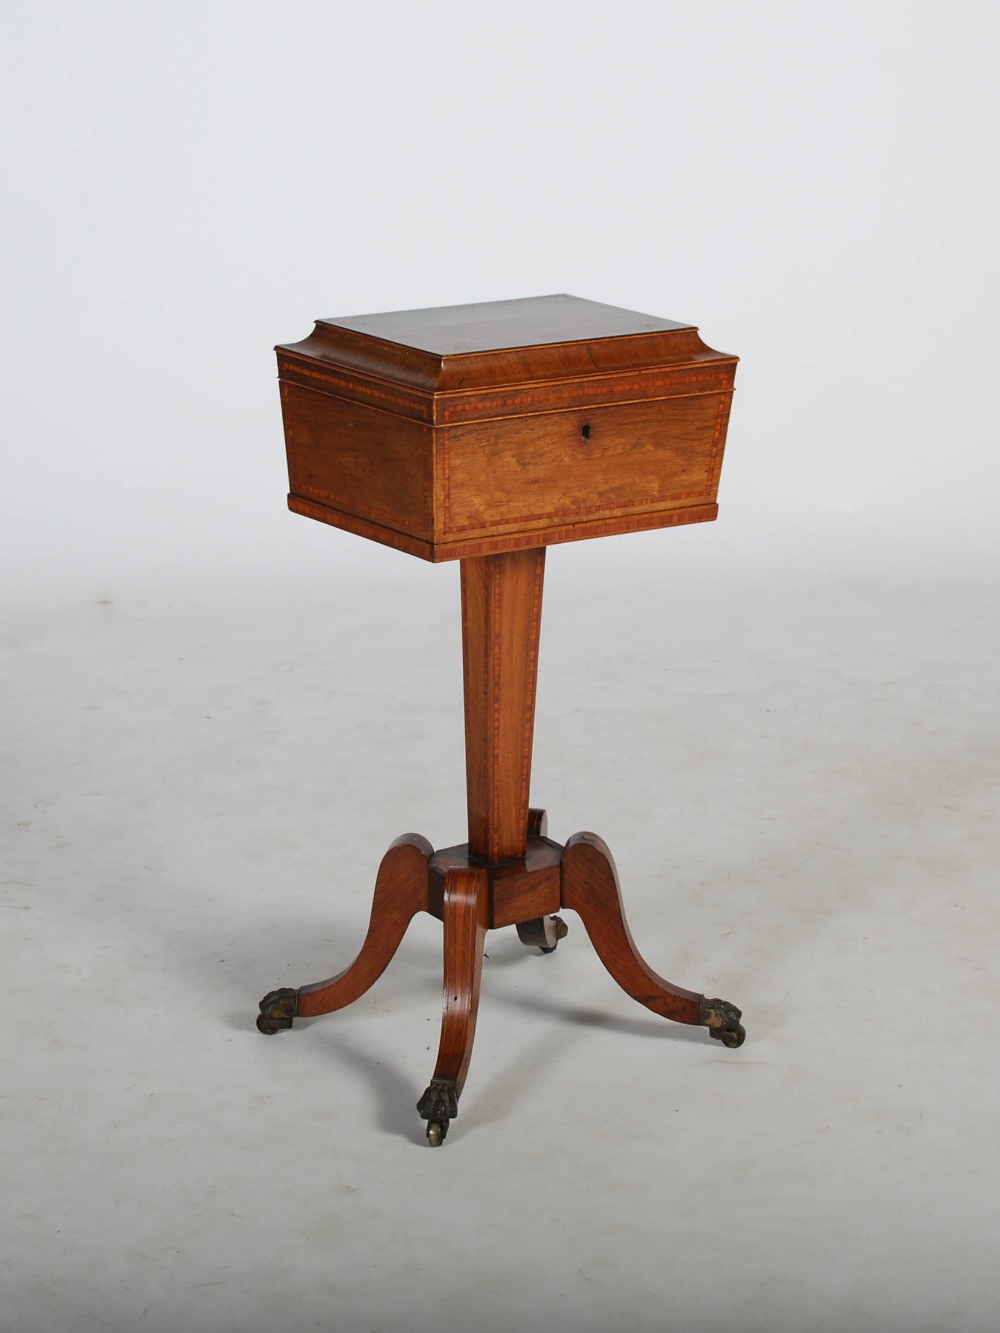 A 19th century rosewood and satinwood banded tea poy, the sarcophagus shaped top with a hinged cover